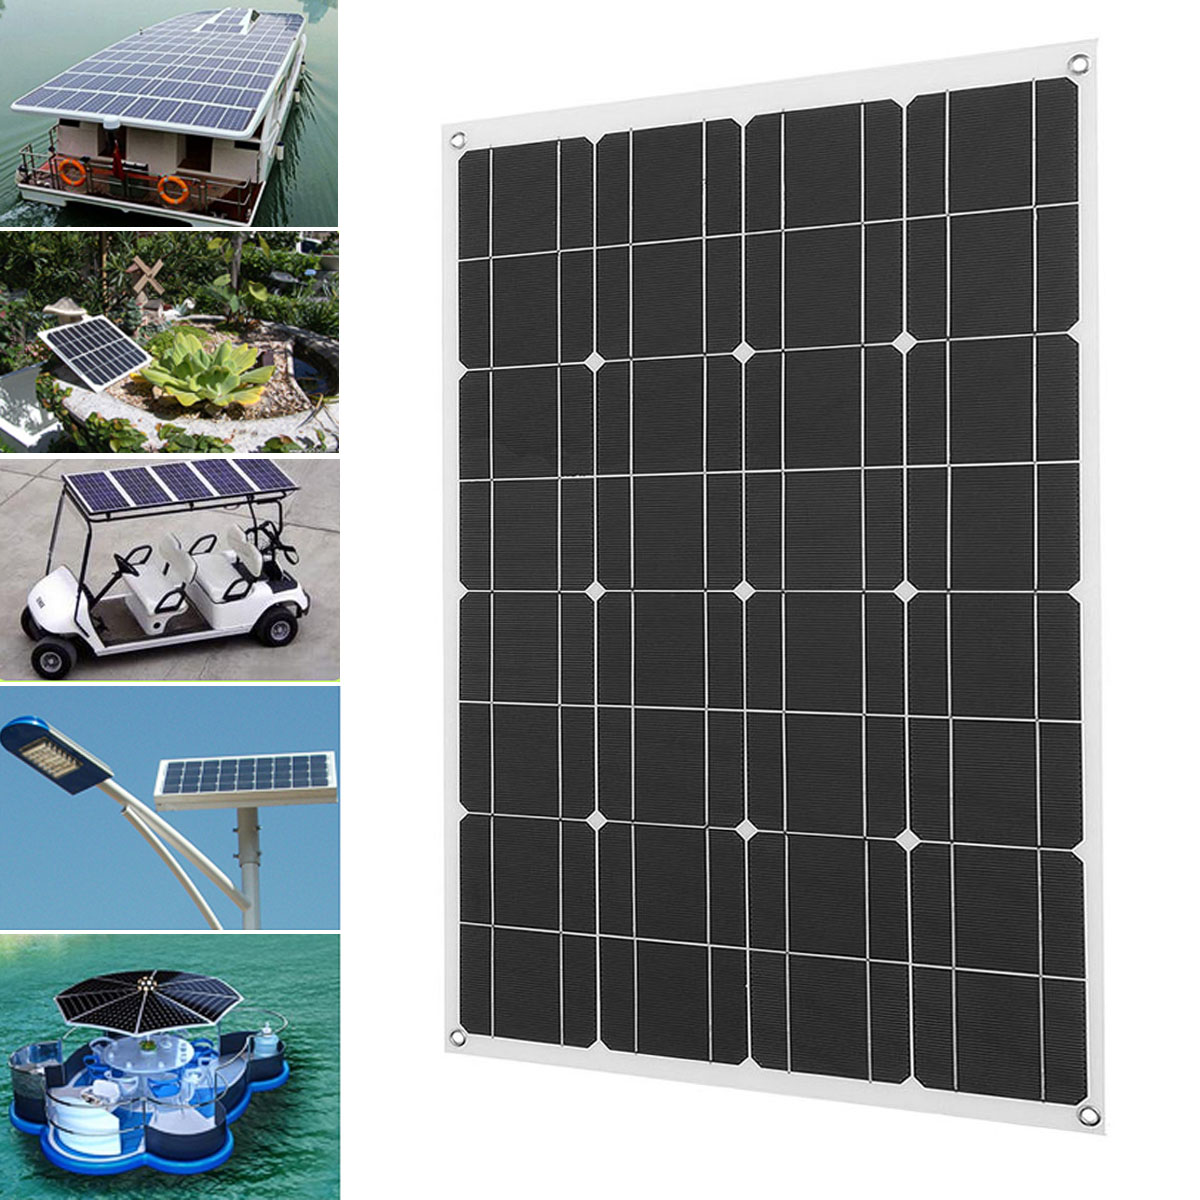 80W 12V Semi Flexible Waterproof Solar Panels With 1.5m Cable 9